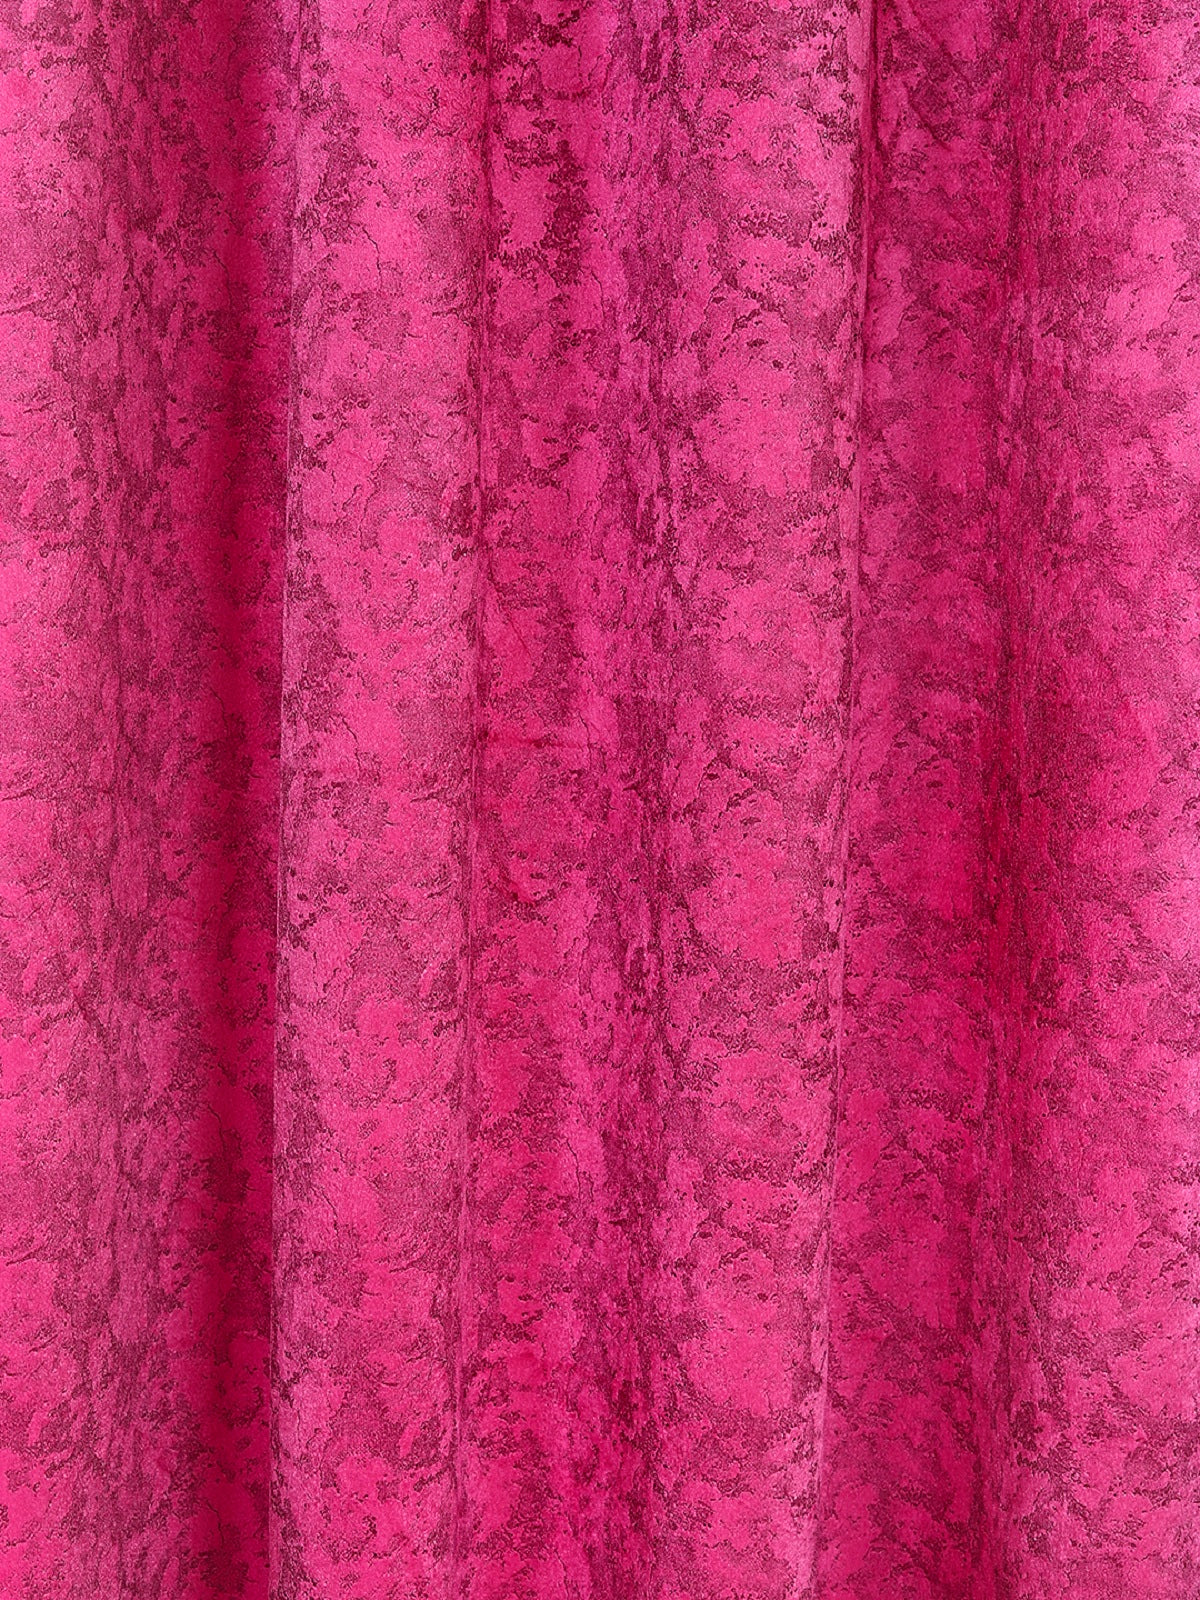 Romee Pink Texture Patterned Set of 2 Door Curtains